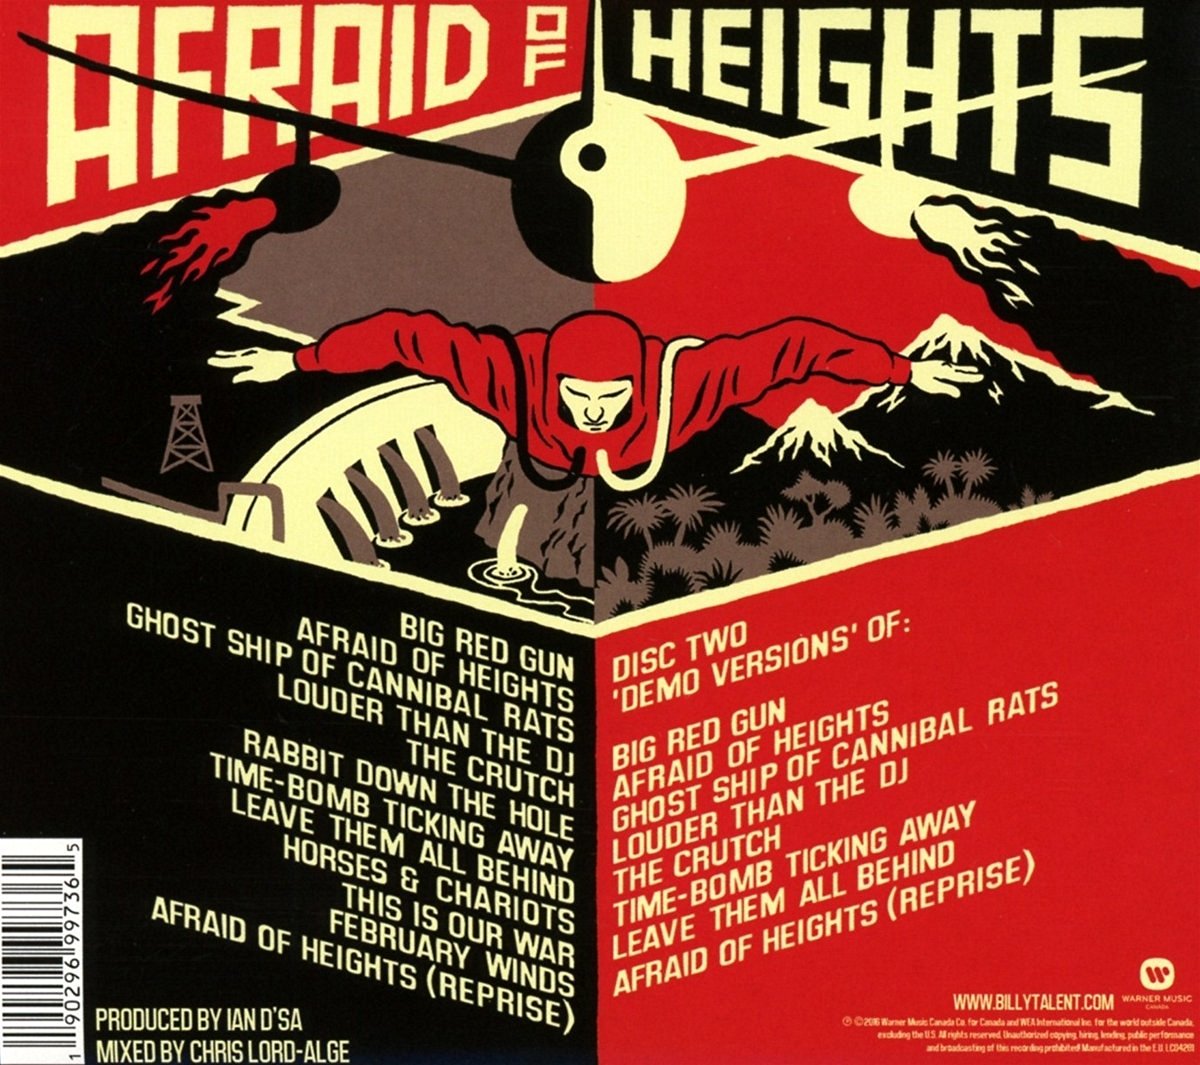 Afraid of Heights Deluxe Version | Billy Talent image